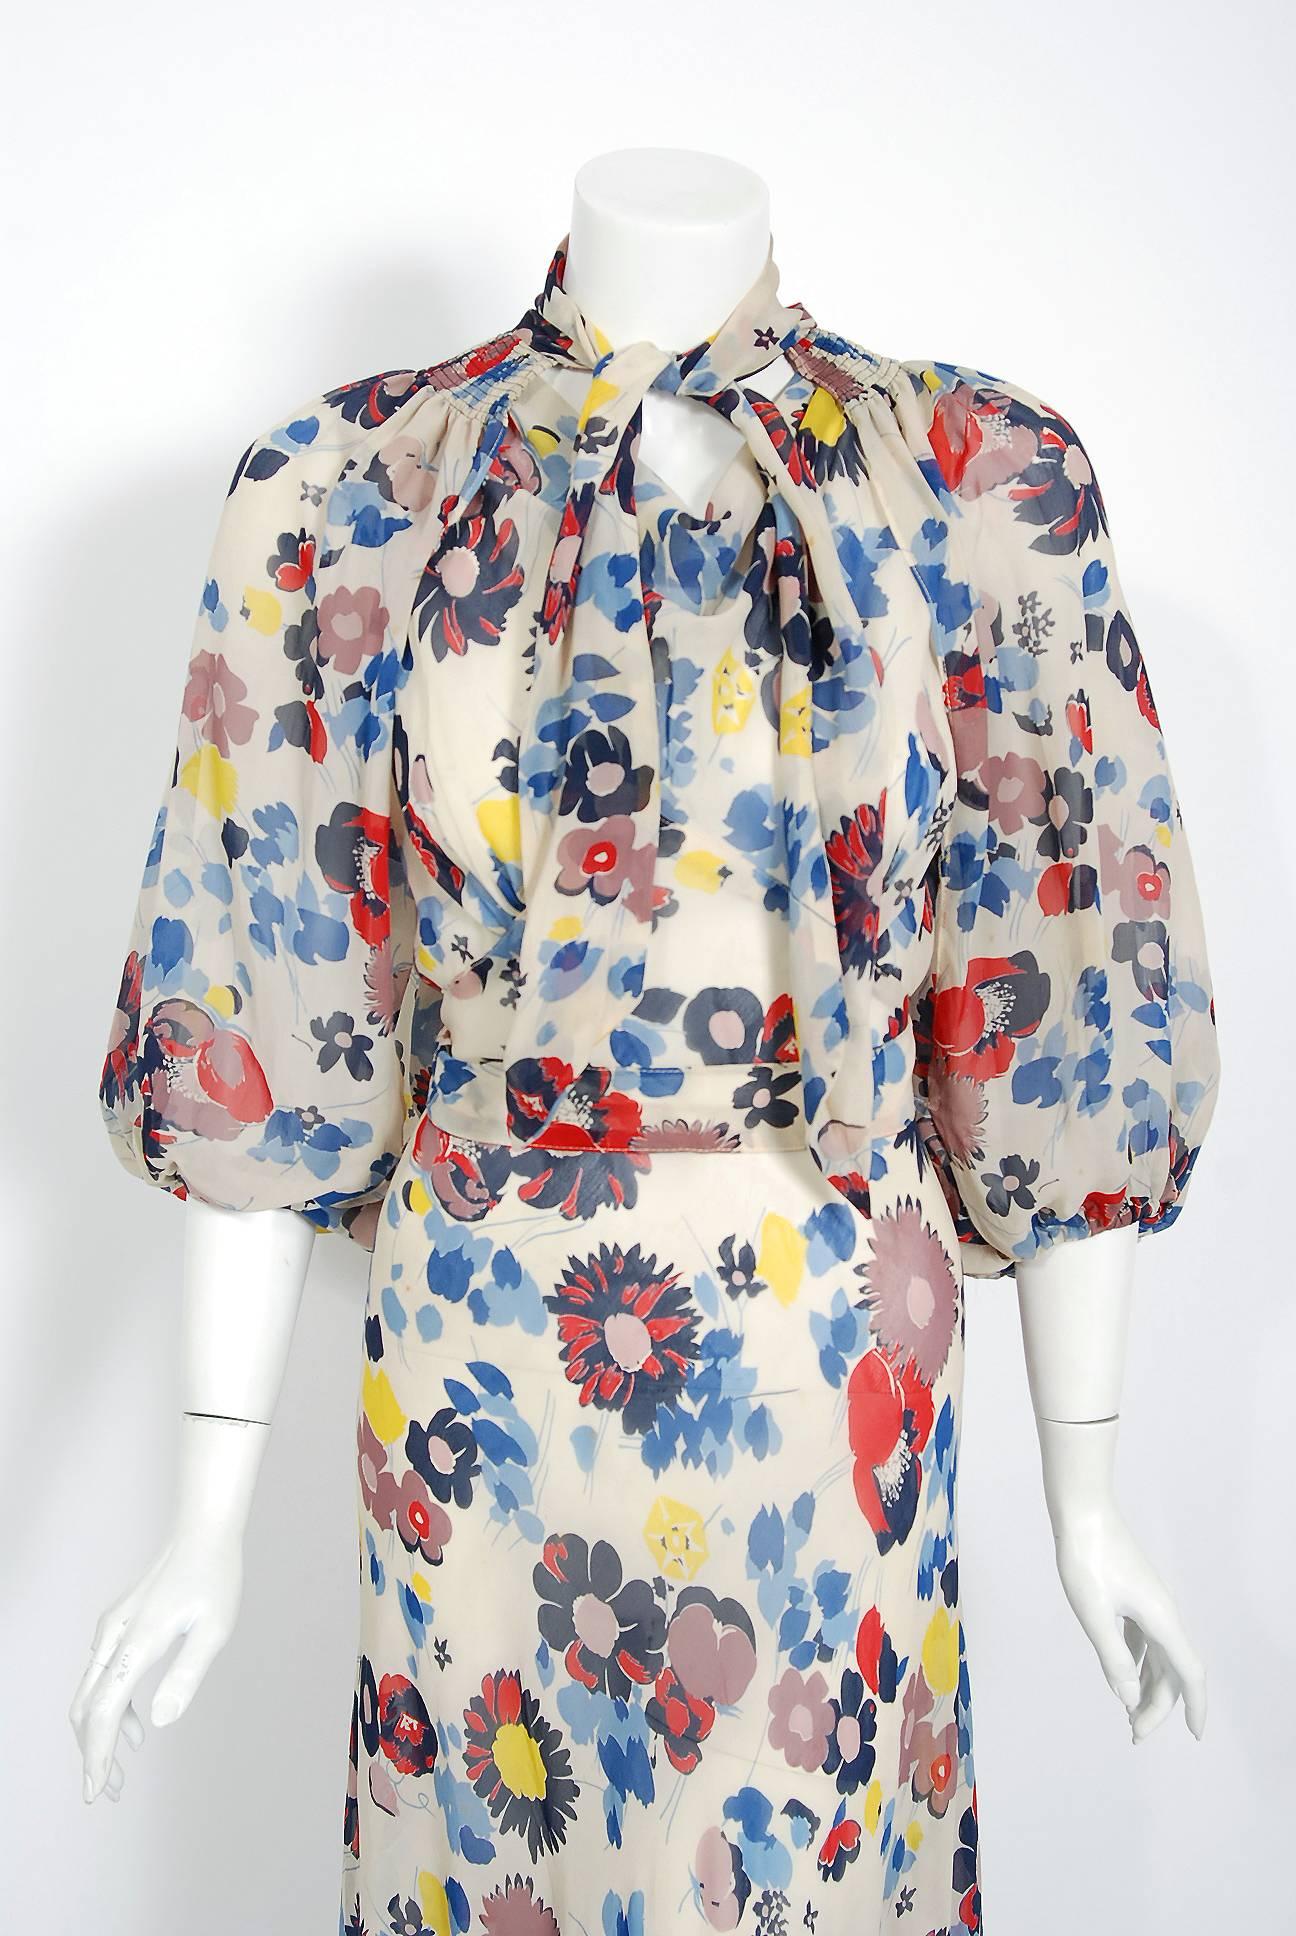 The breathtaking floral garden deco print used on this 1930's semi-sheer silk chiffon gown ensemble has a fresh innocence that I find irresistible. The bodice is a low plunge cowl-neck sleeveless. The belted nipped waist falls into an hourglass